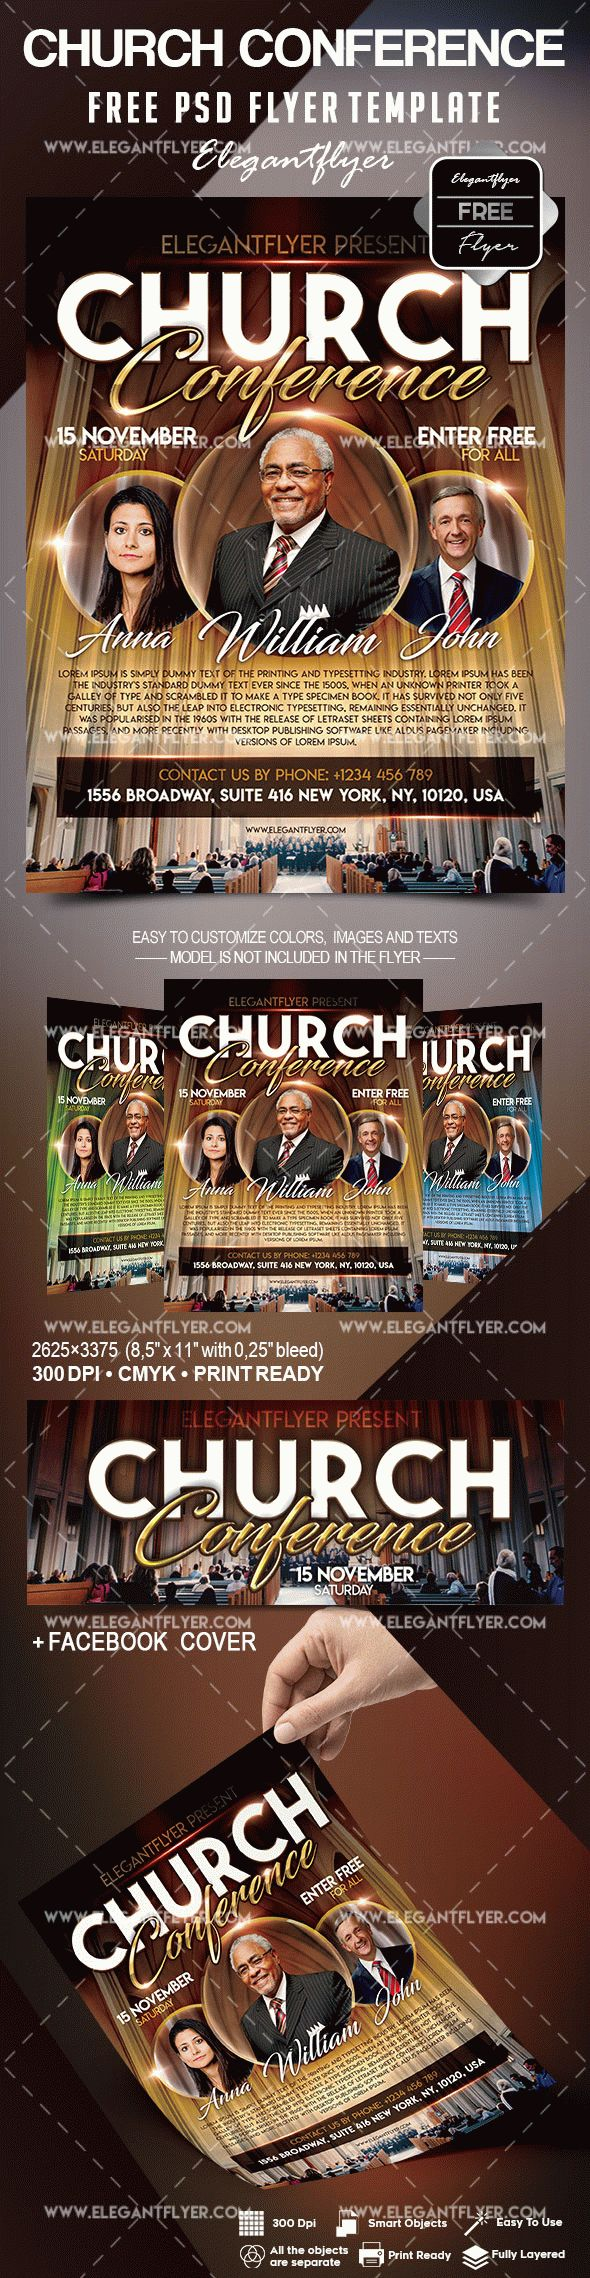 Free Church Conference Flyer Template  by ElegantFlyer In Church Conference Flyer Template Pertaining To Church Conference Flyer Template